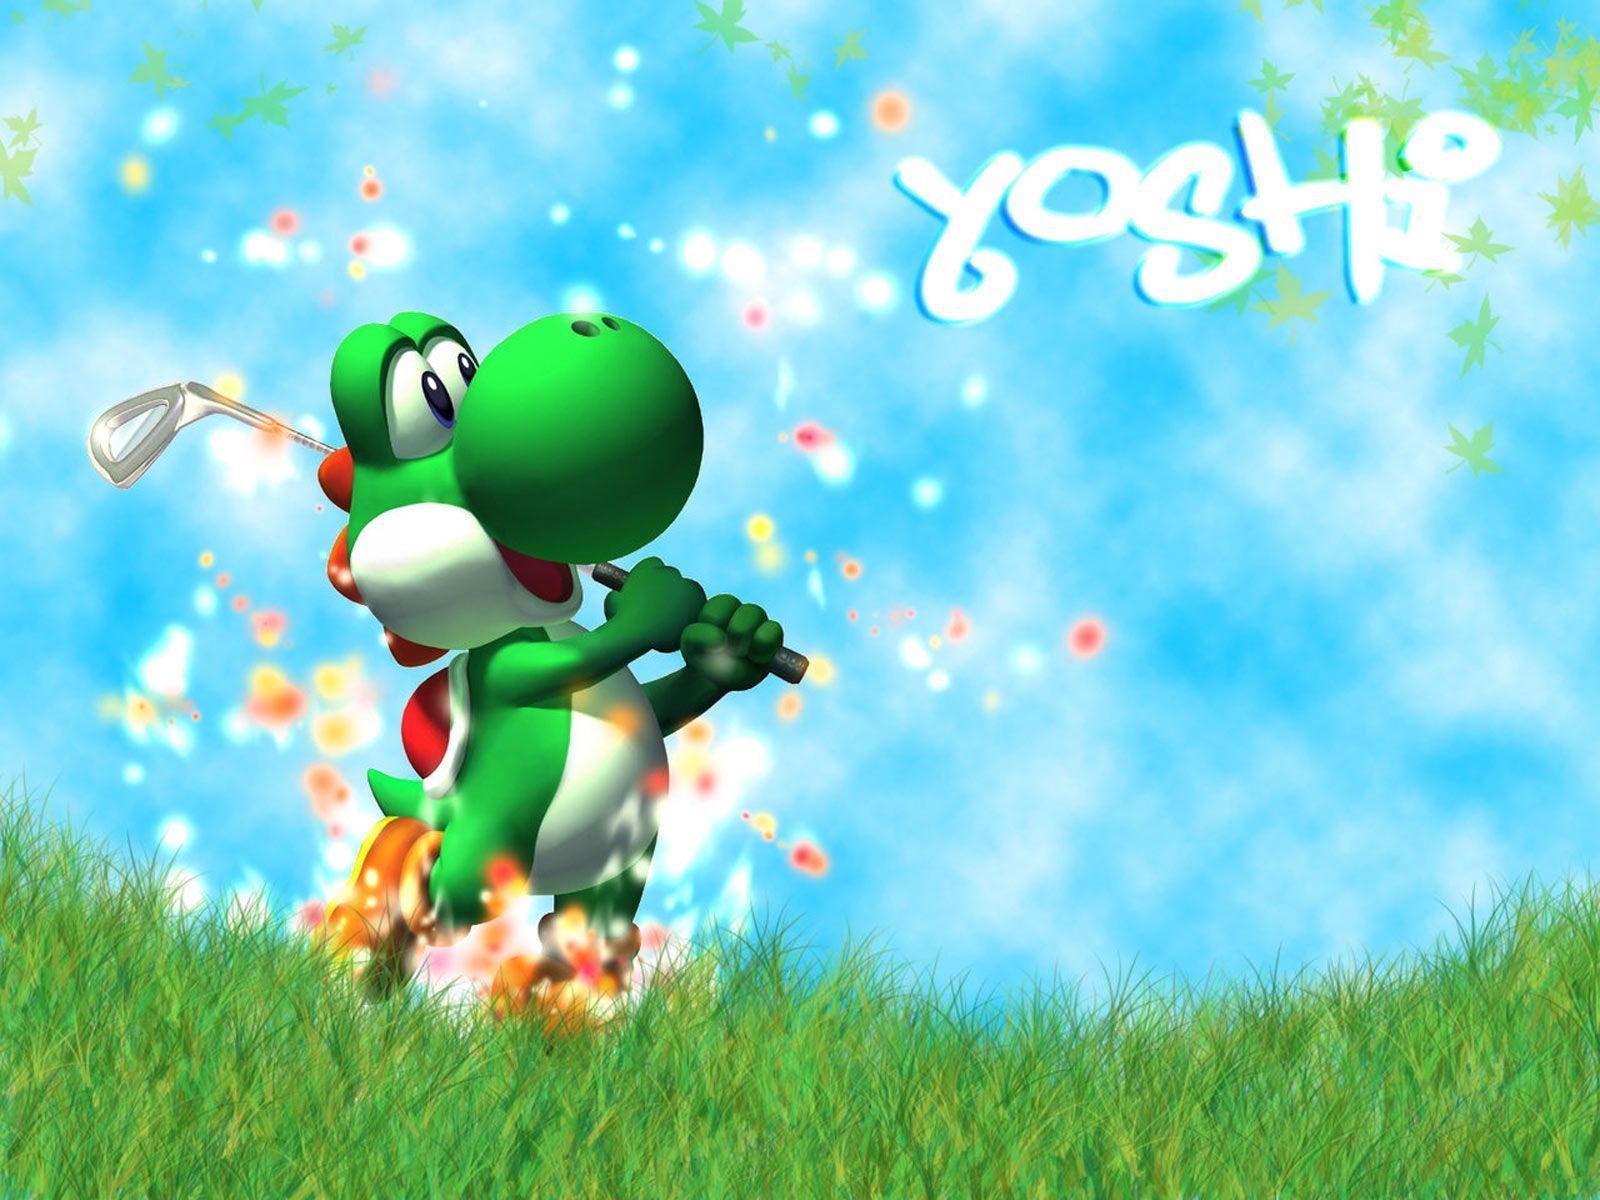 39 Yoshi HD Wallpapers | Backgrounds - Wallpaper Abyss